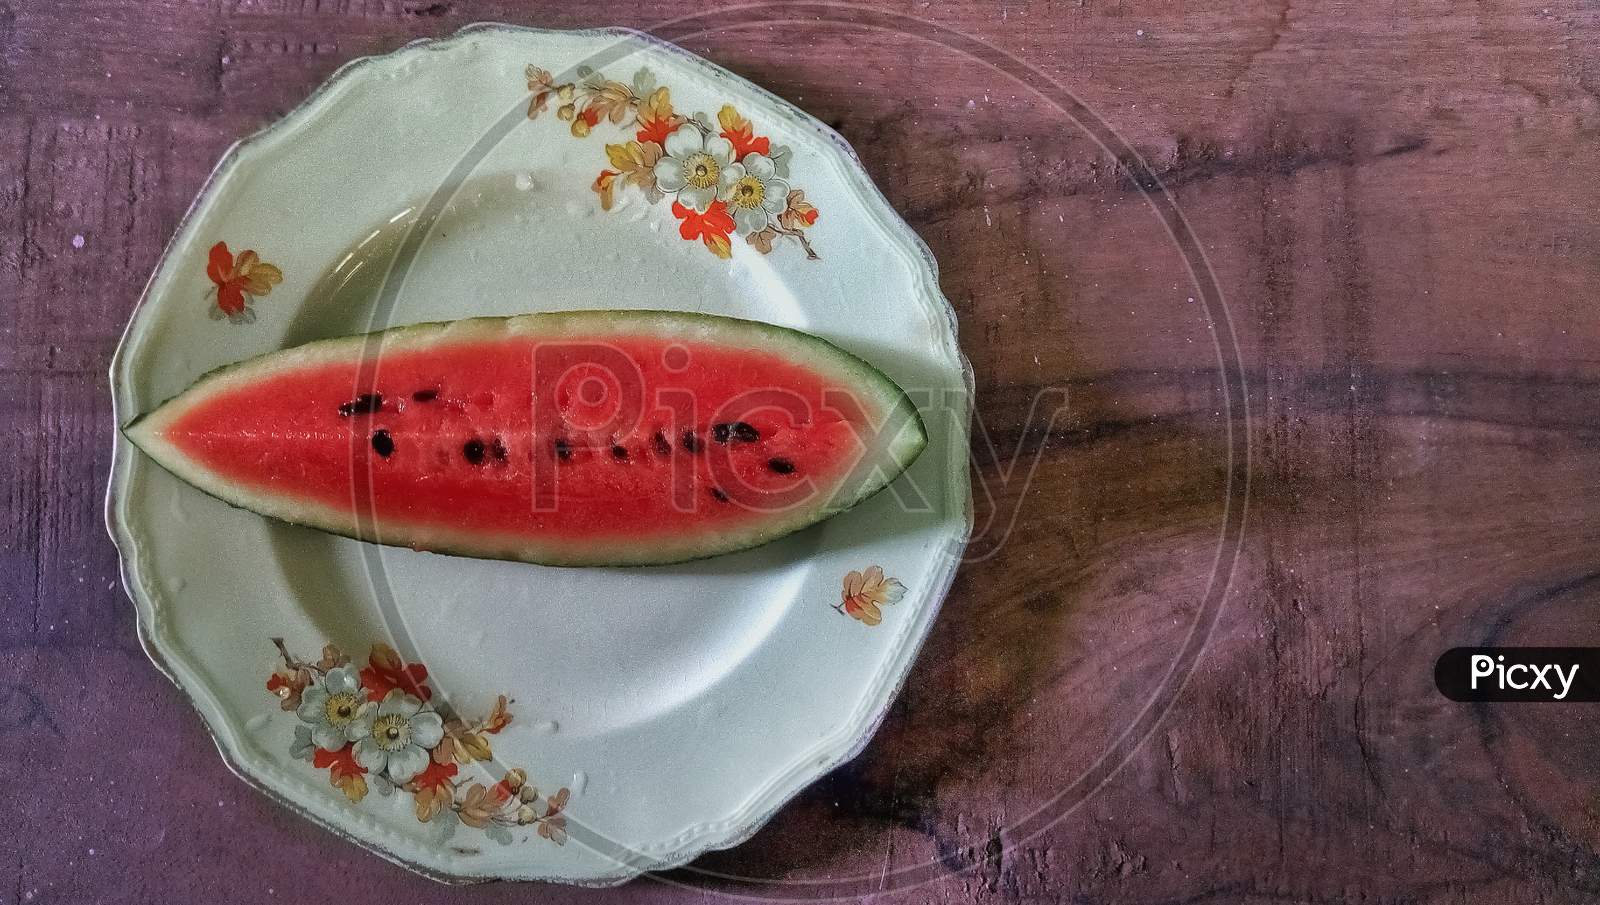 Watermelon on dish or plate